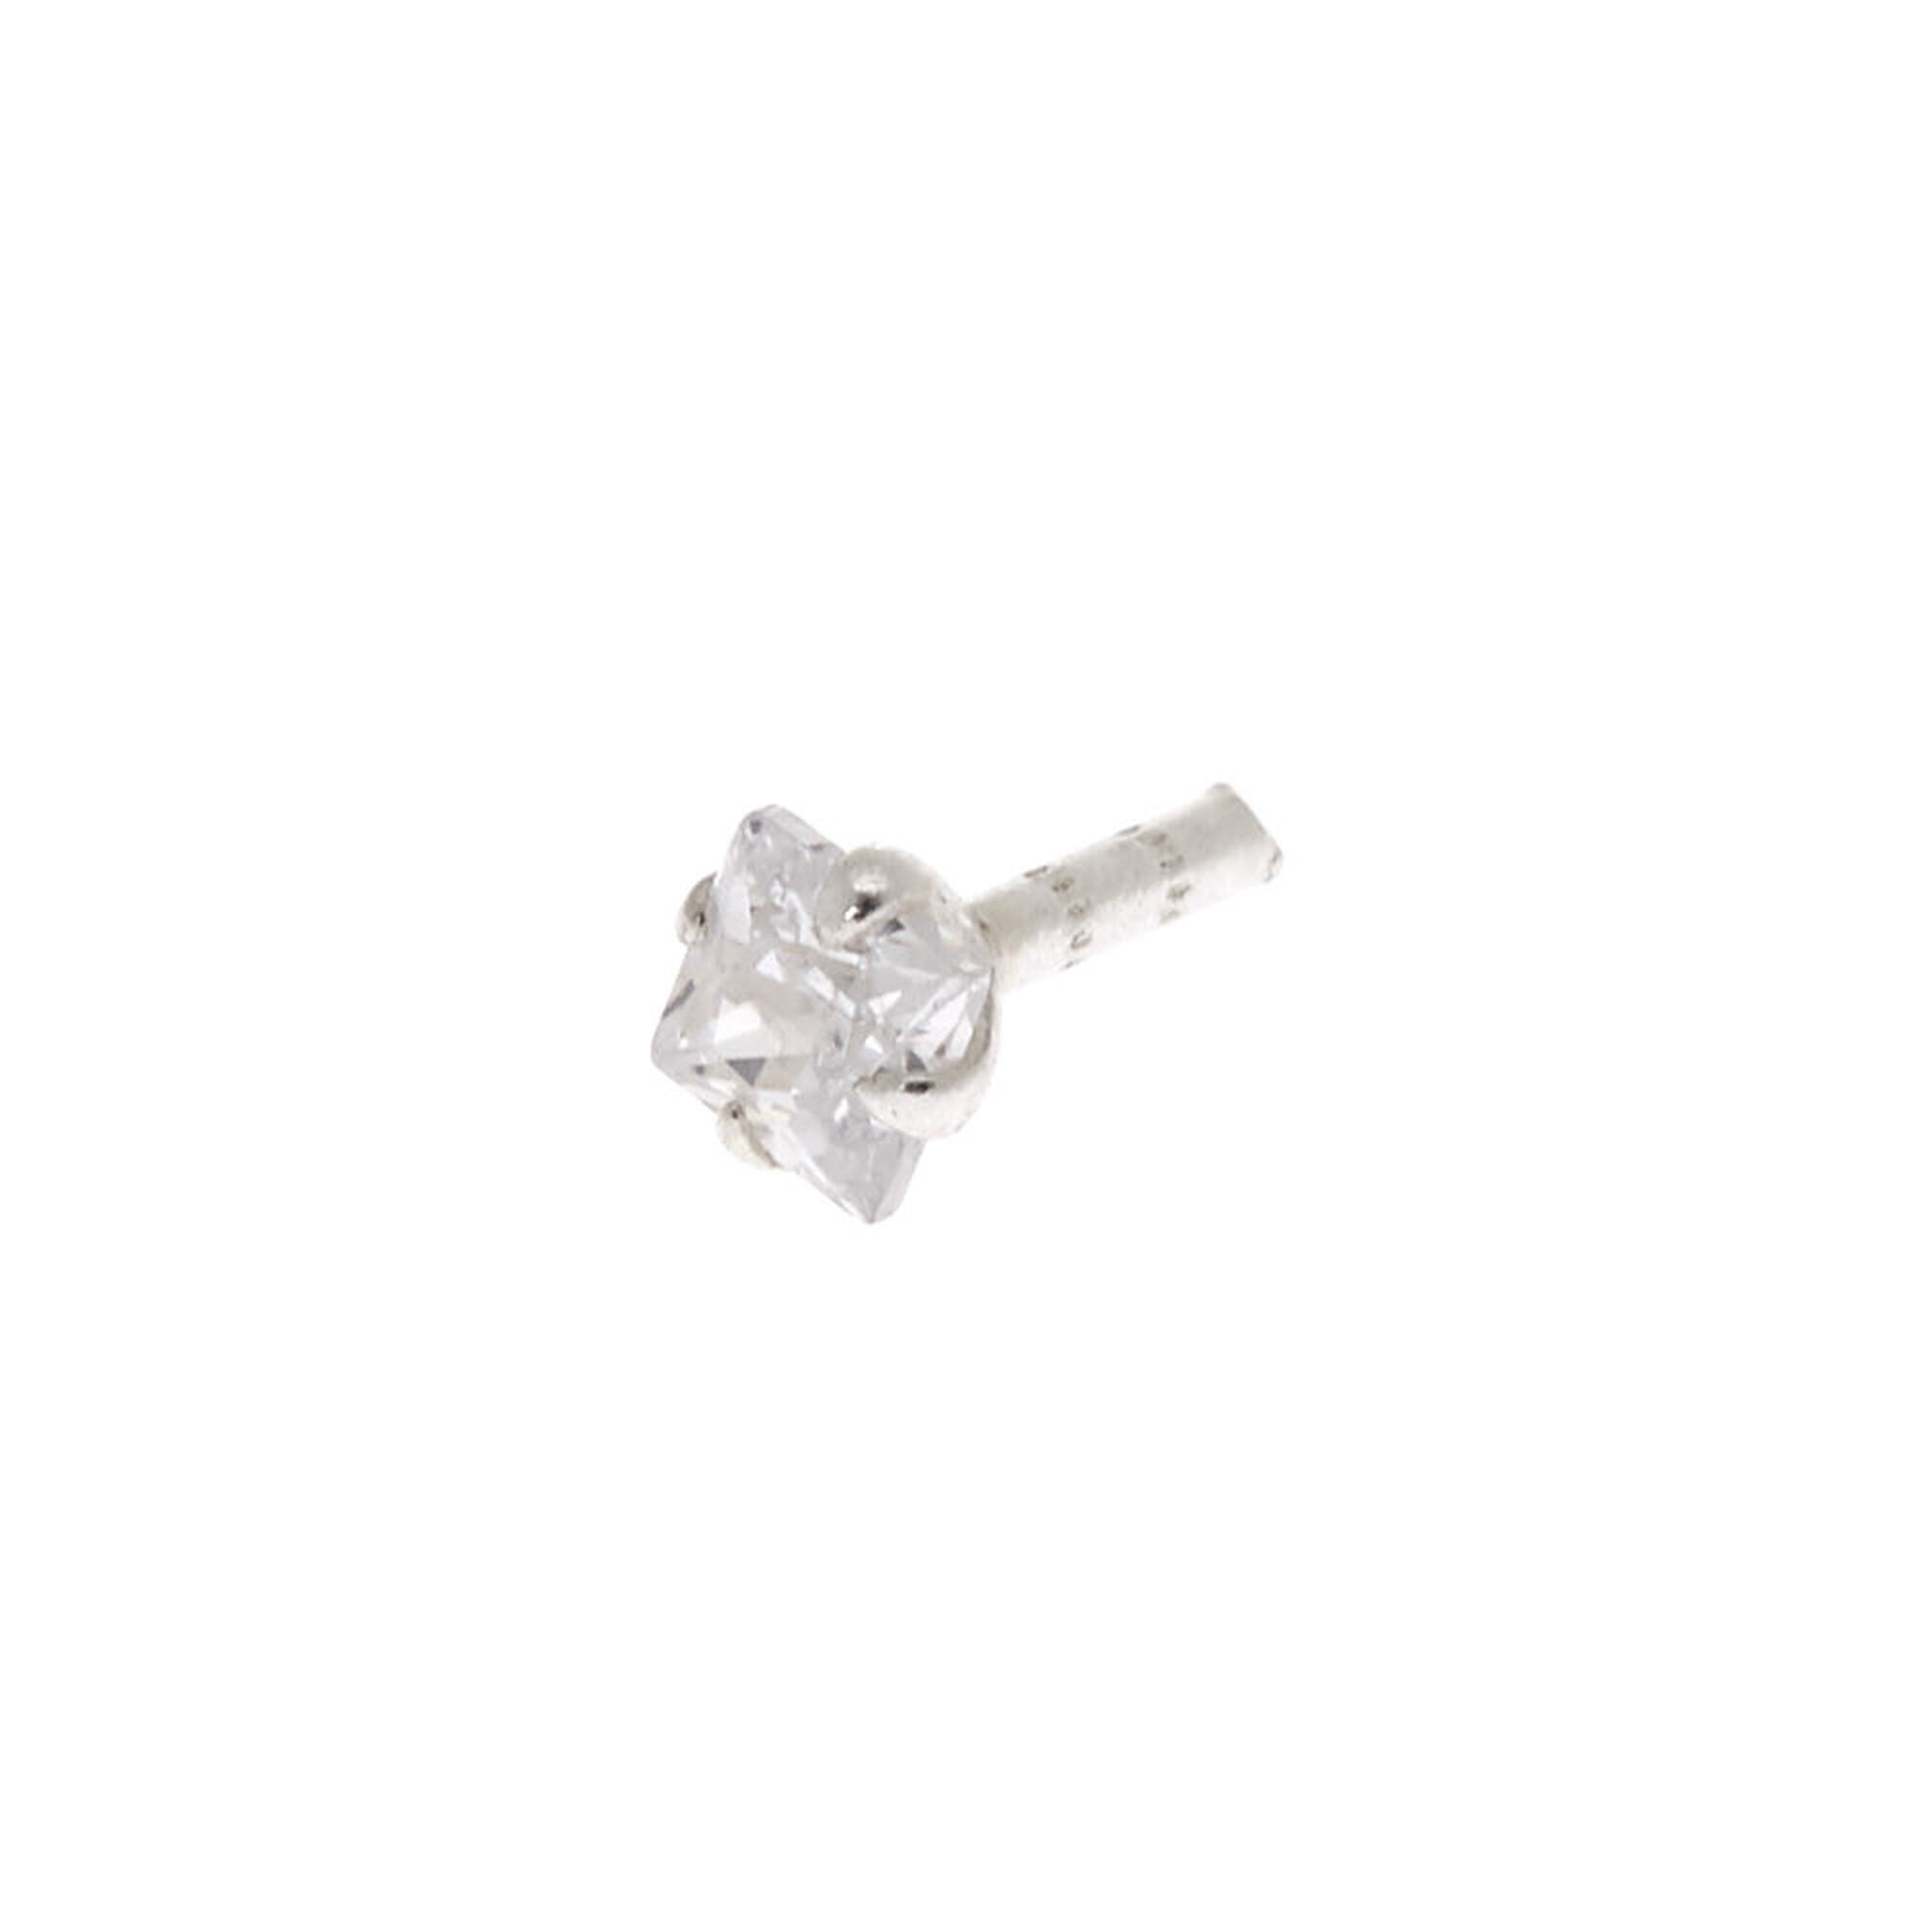 View Claires Tone 16G Stone Tragus Stud Flat Back Earring Silver information